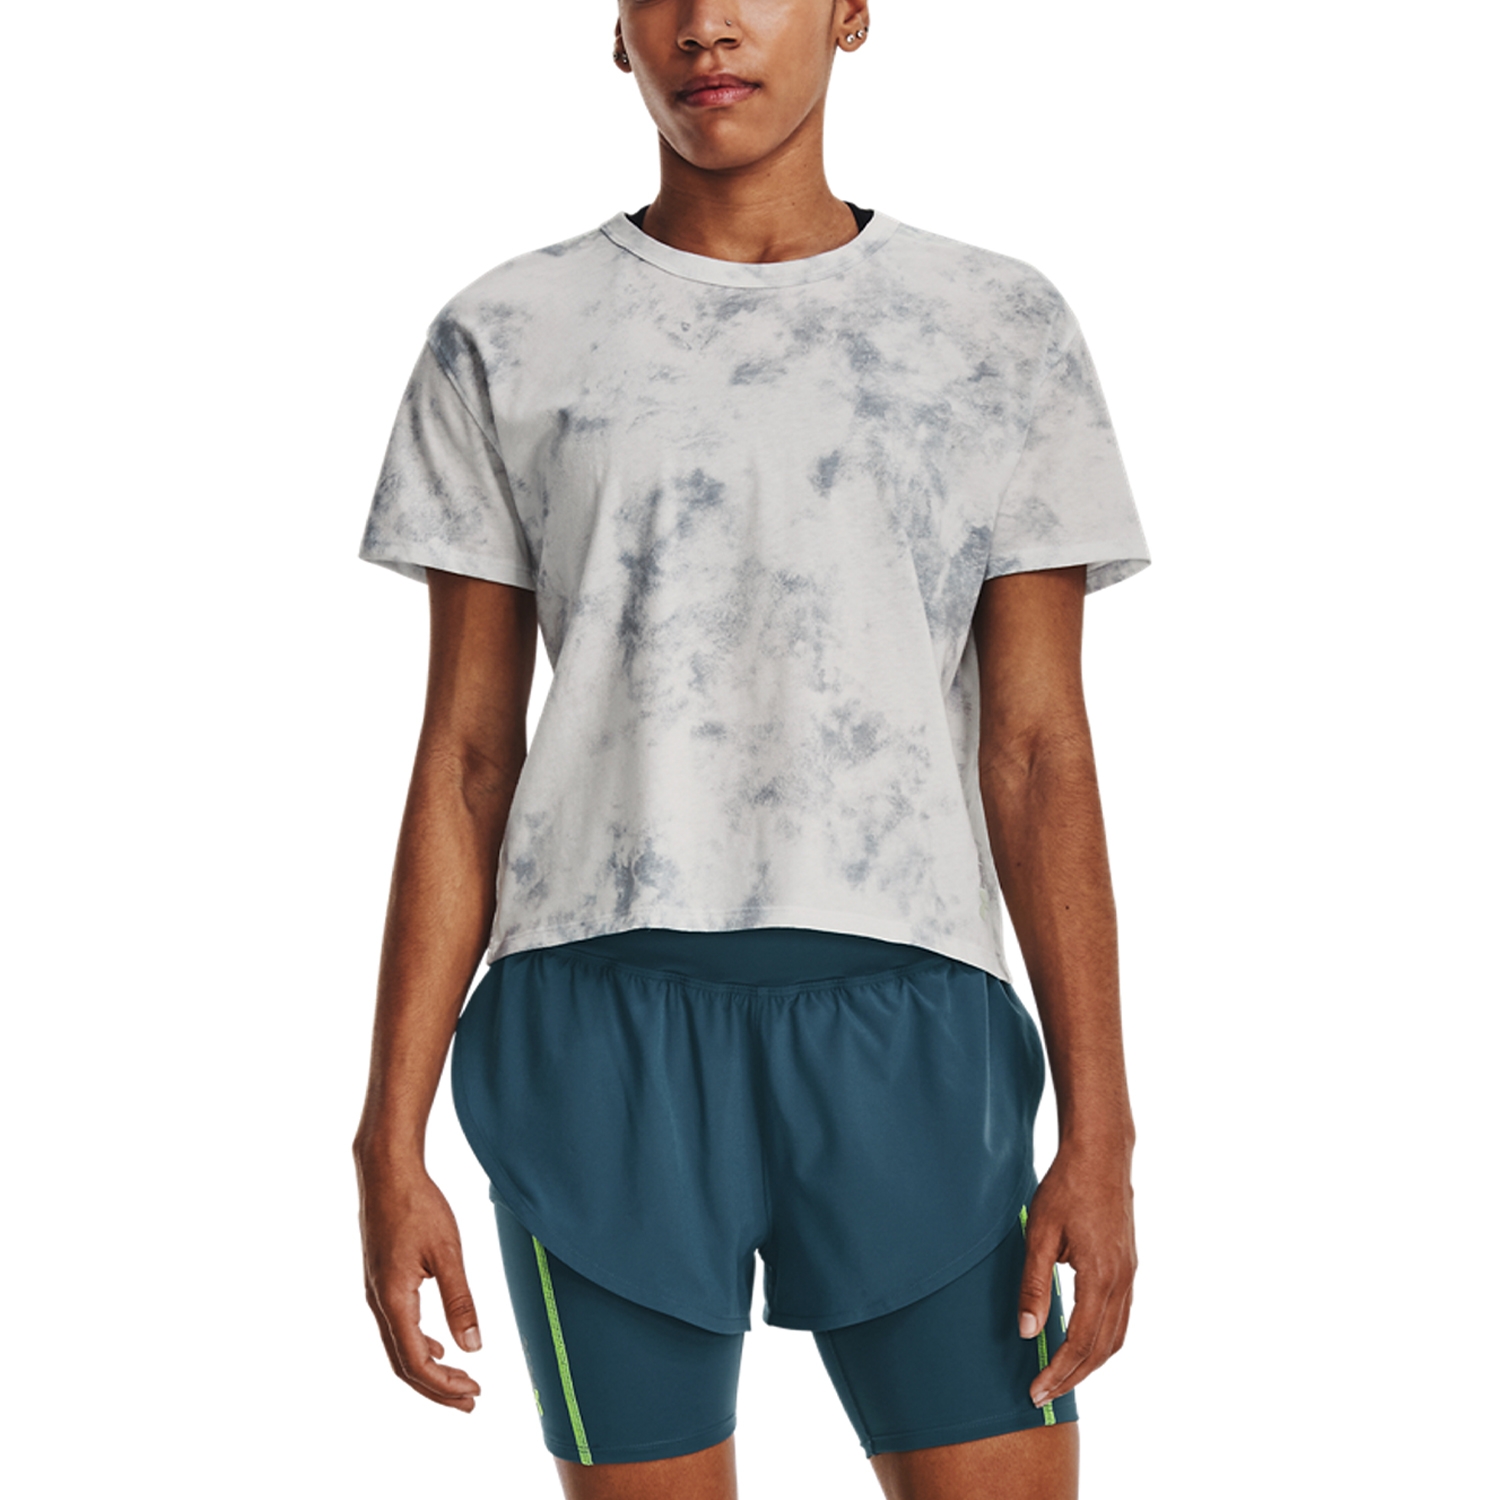 Under Armour Anywhere Graphic T-Shirt - Gray Mist/Harbor Blue